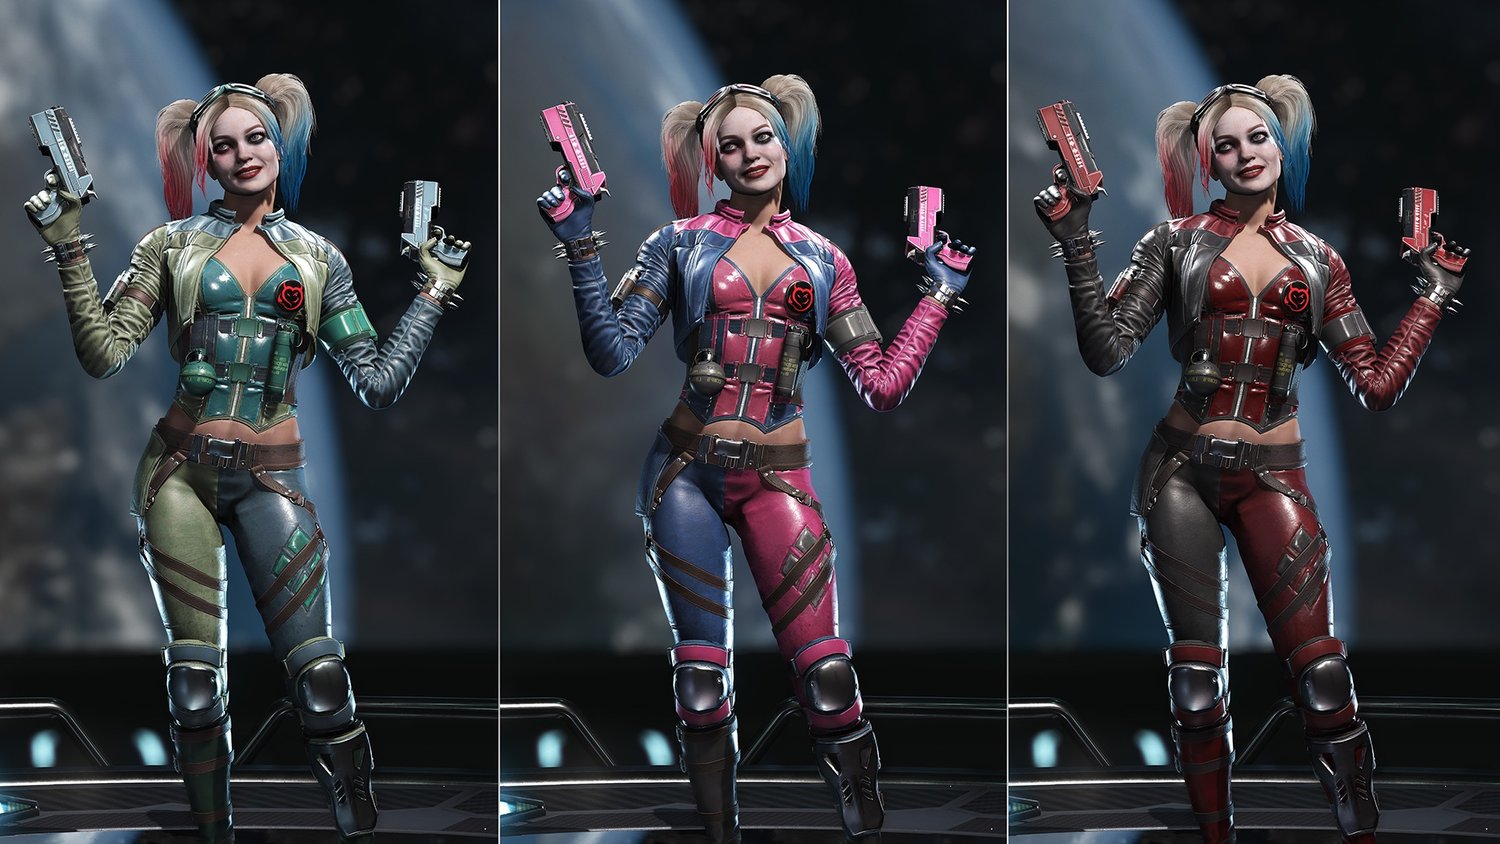 Colectivo agrio hemisferio Injustice 2 Will Have Microtransactions In Addition To DLC — GameTyrant